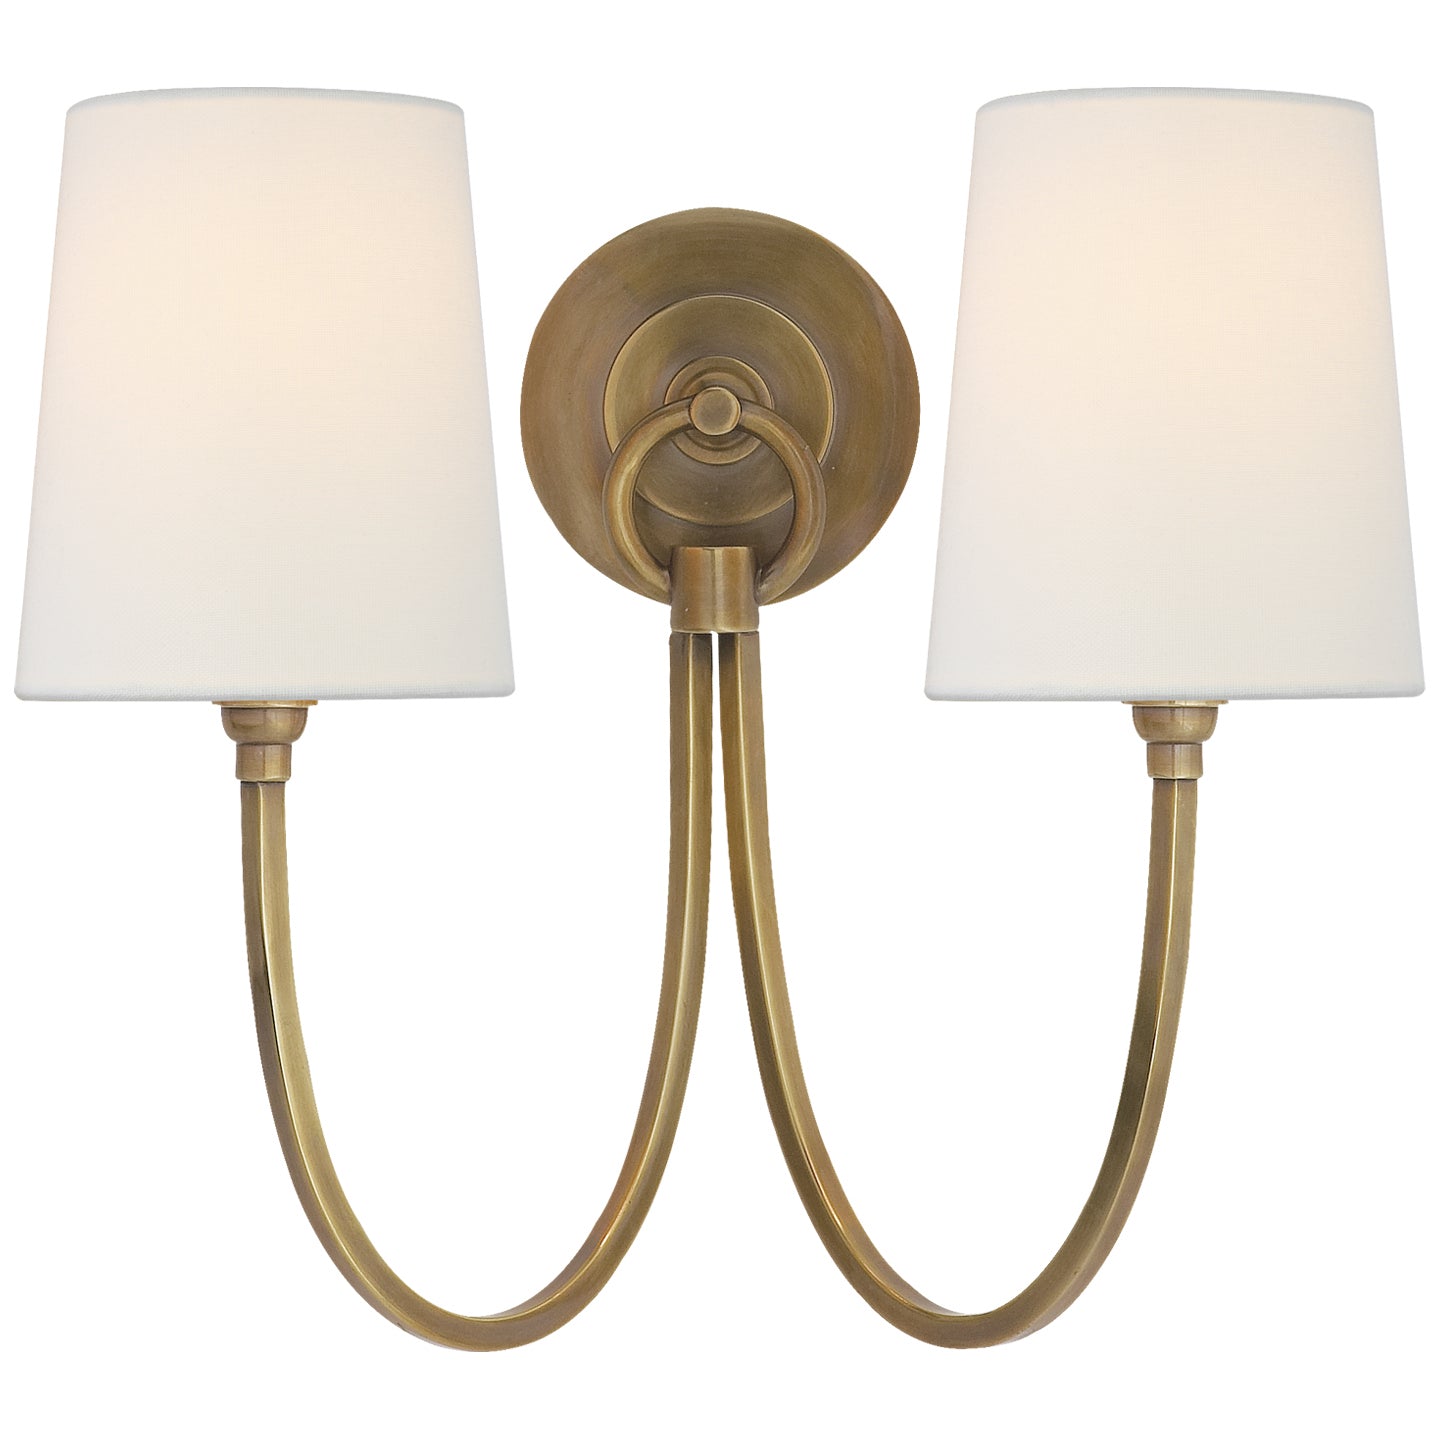 Visual Comfort Signature Canada - Two Light Wall Sconce - Reed - Hand-Rubbed Antique Brass- Union Lighting Luminaires Decor